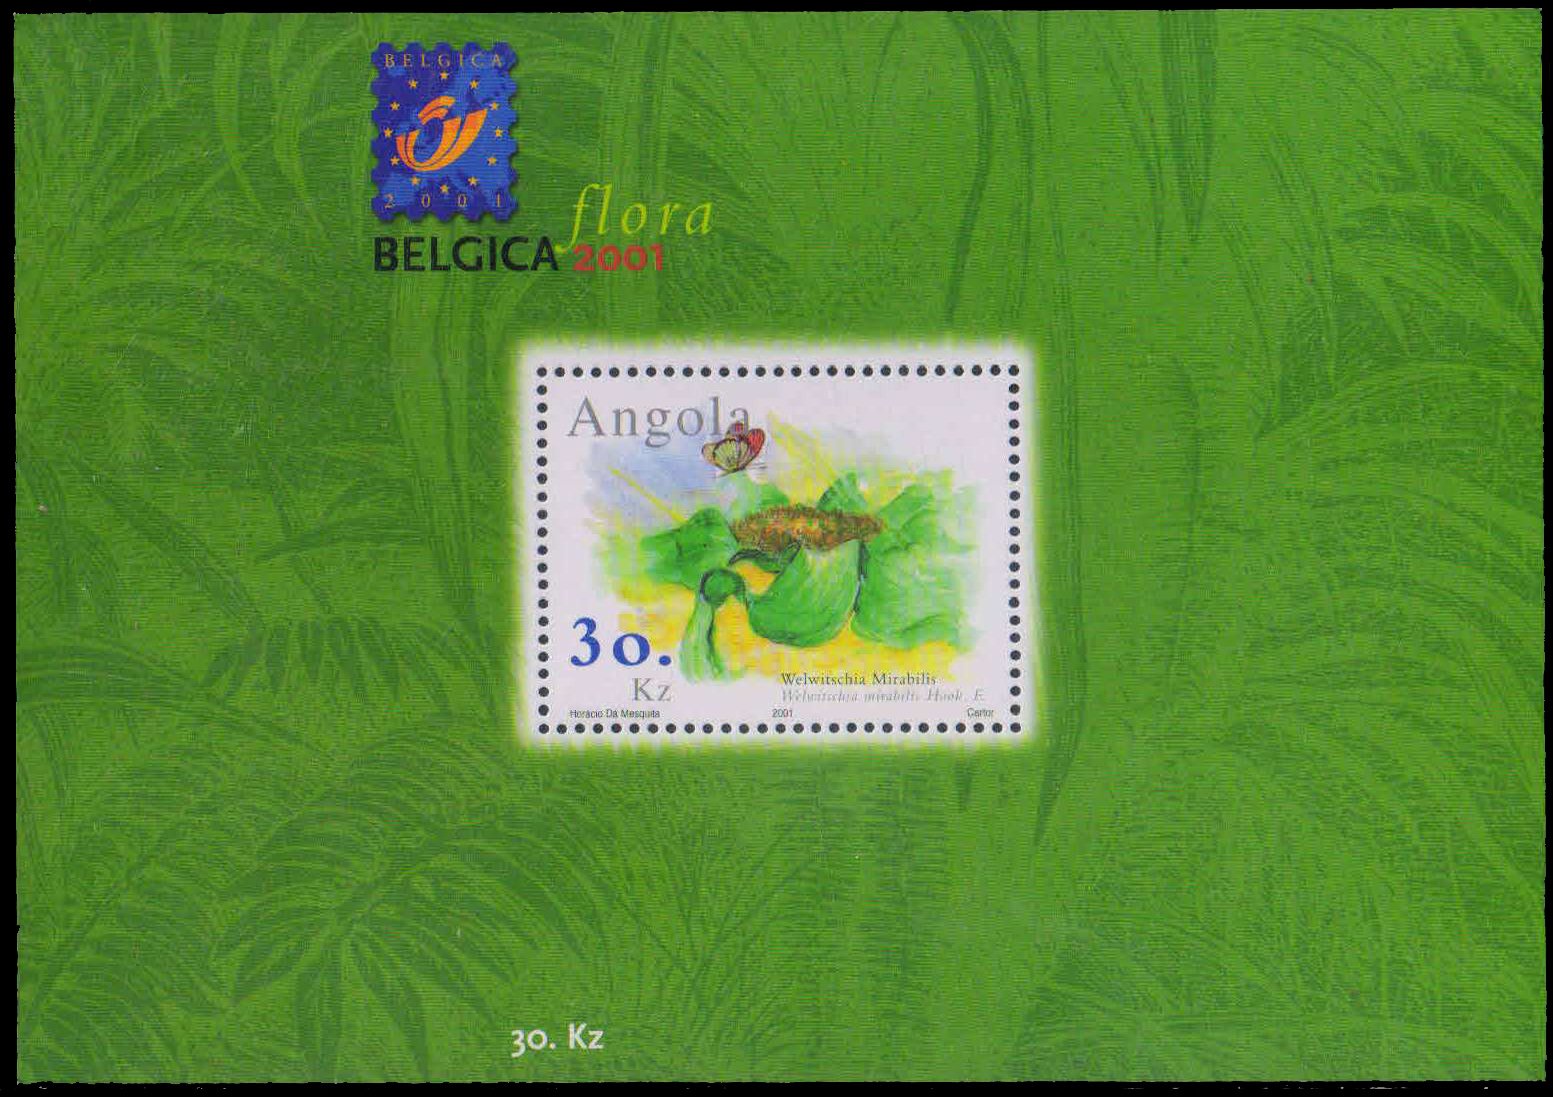 ANGOLA 2001-Flowers, Insect, Butterfly, Belgica International Stamp Exhibition, MS, MNH, S.G. MS 1618-Cat � 10.50